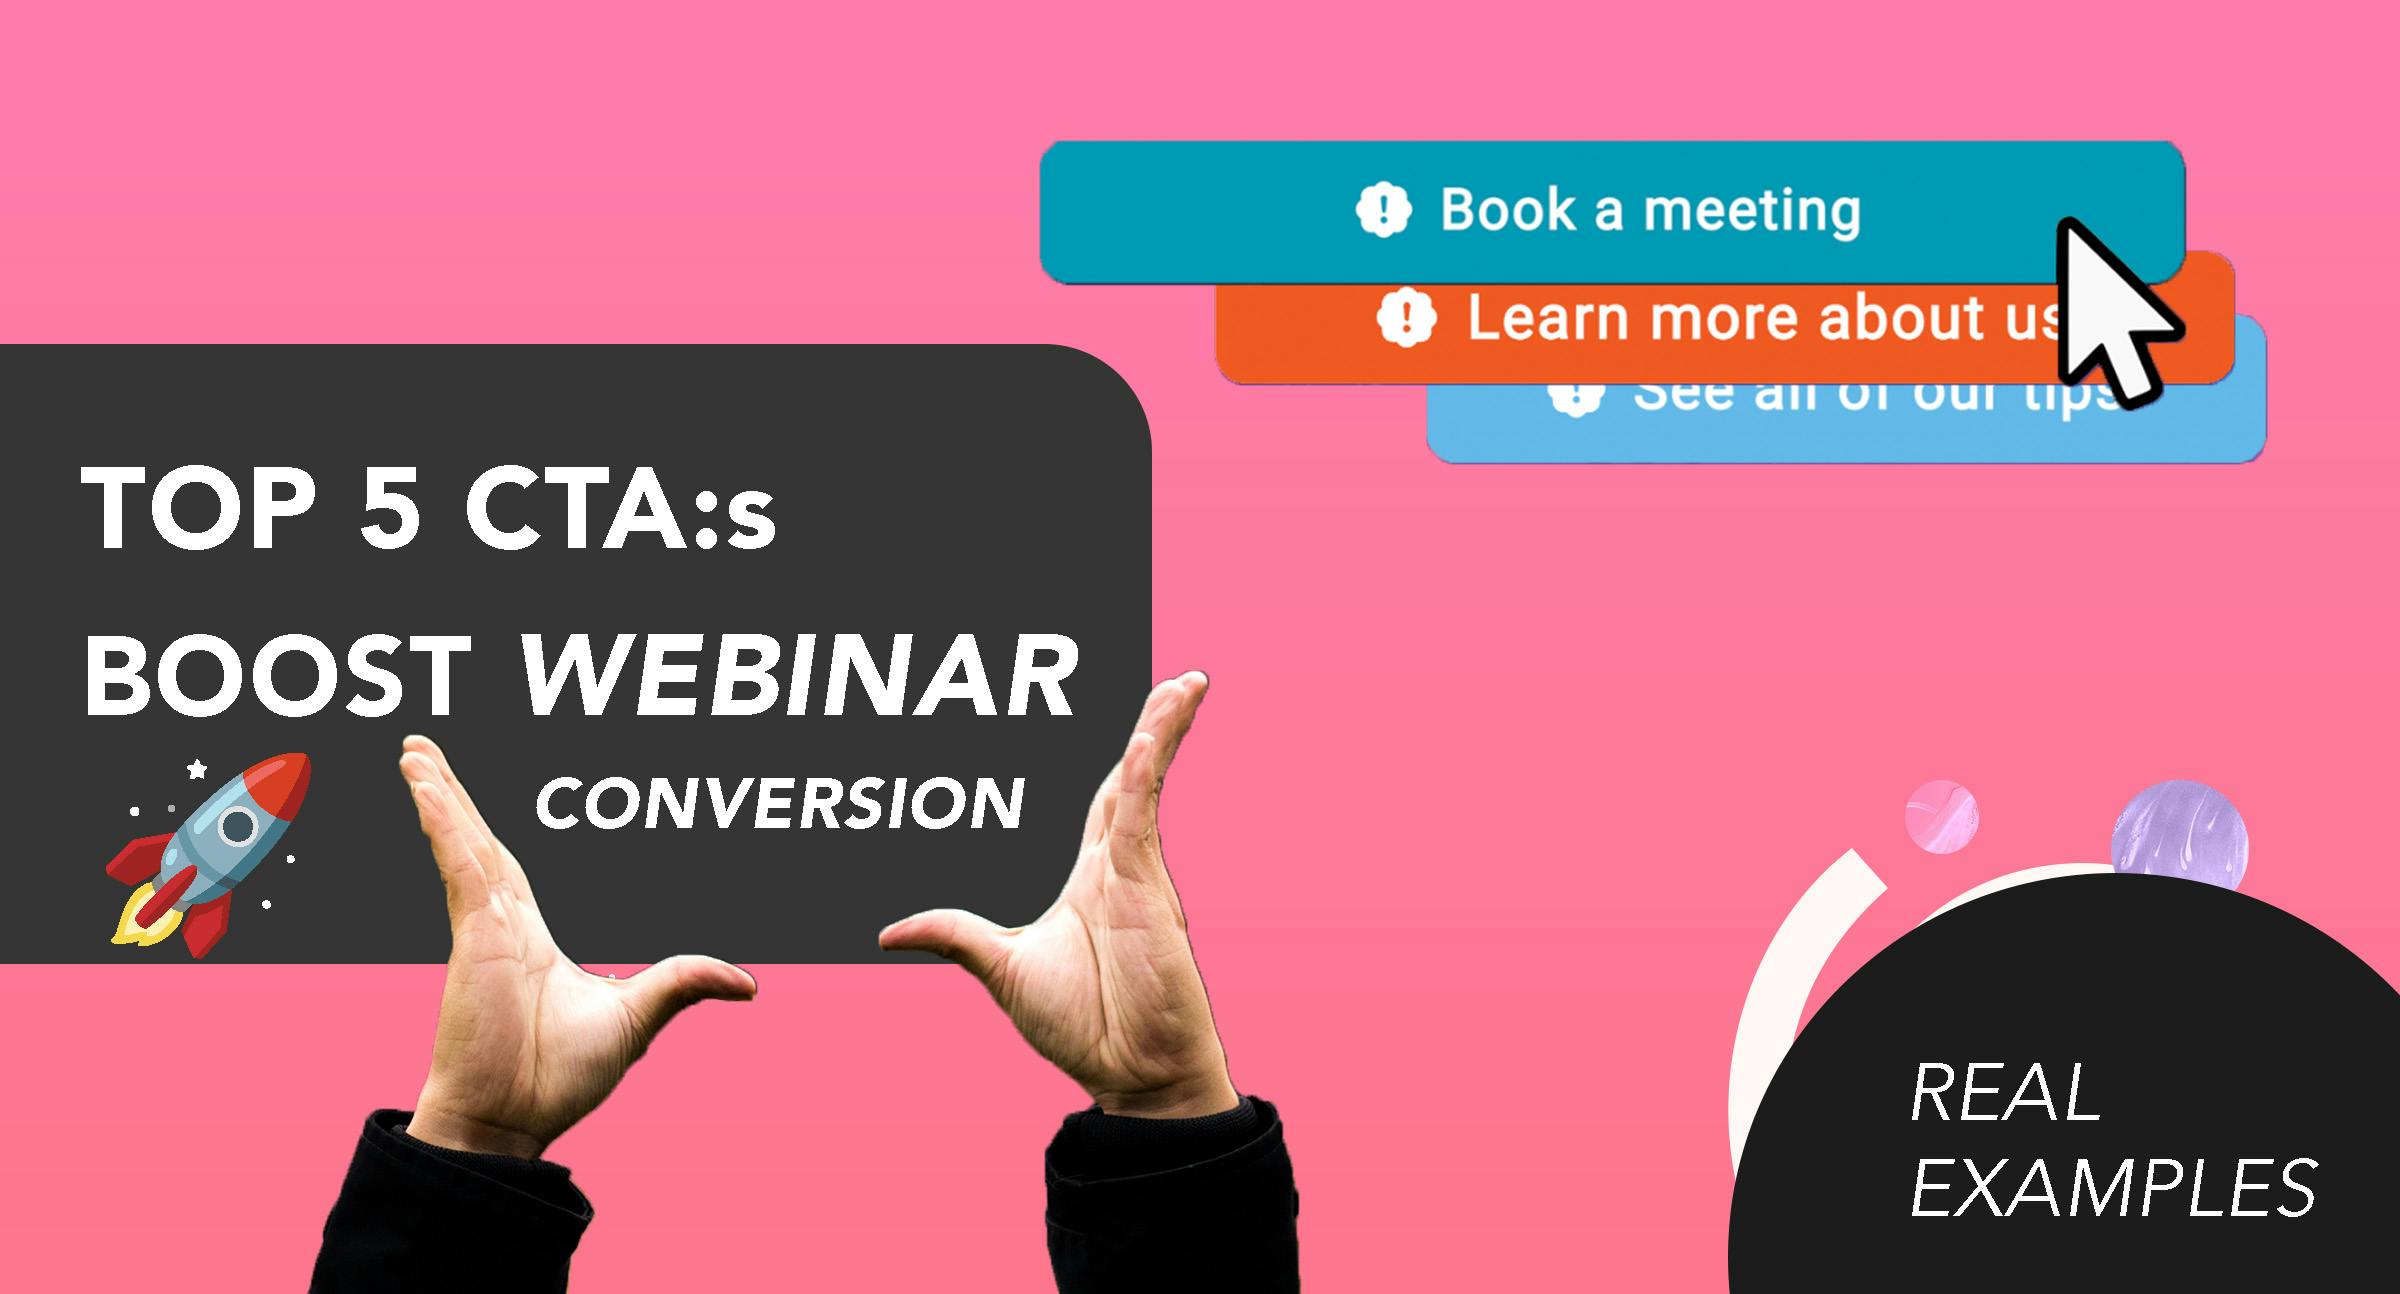 Boost webinar conversion rates with top 5 CTA examples. Create effective CTAs & strategies to drive conversions. Maximize sales with these proven examples.